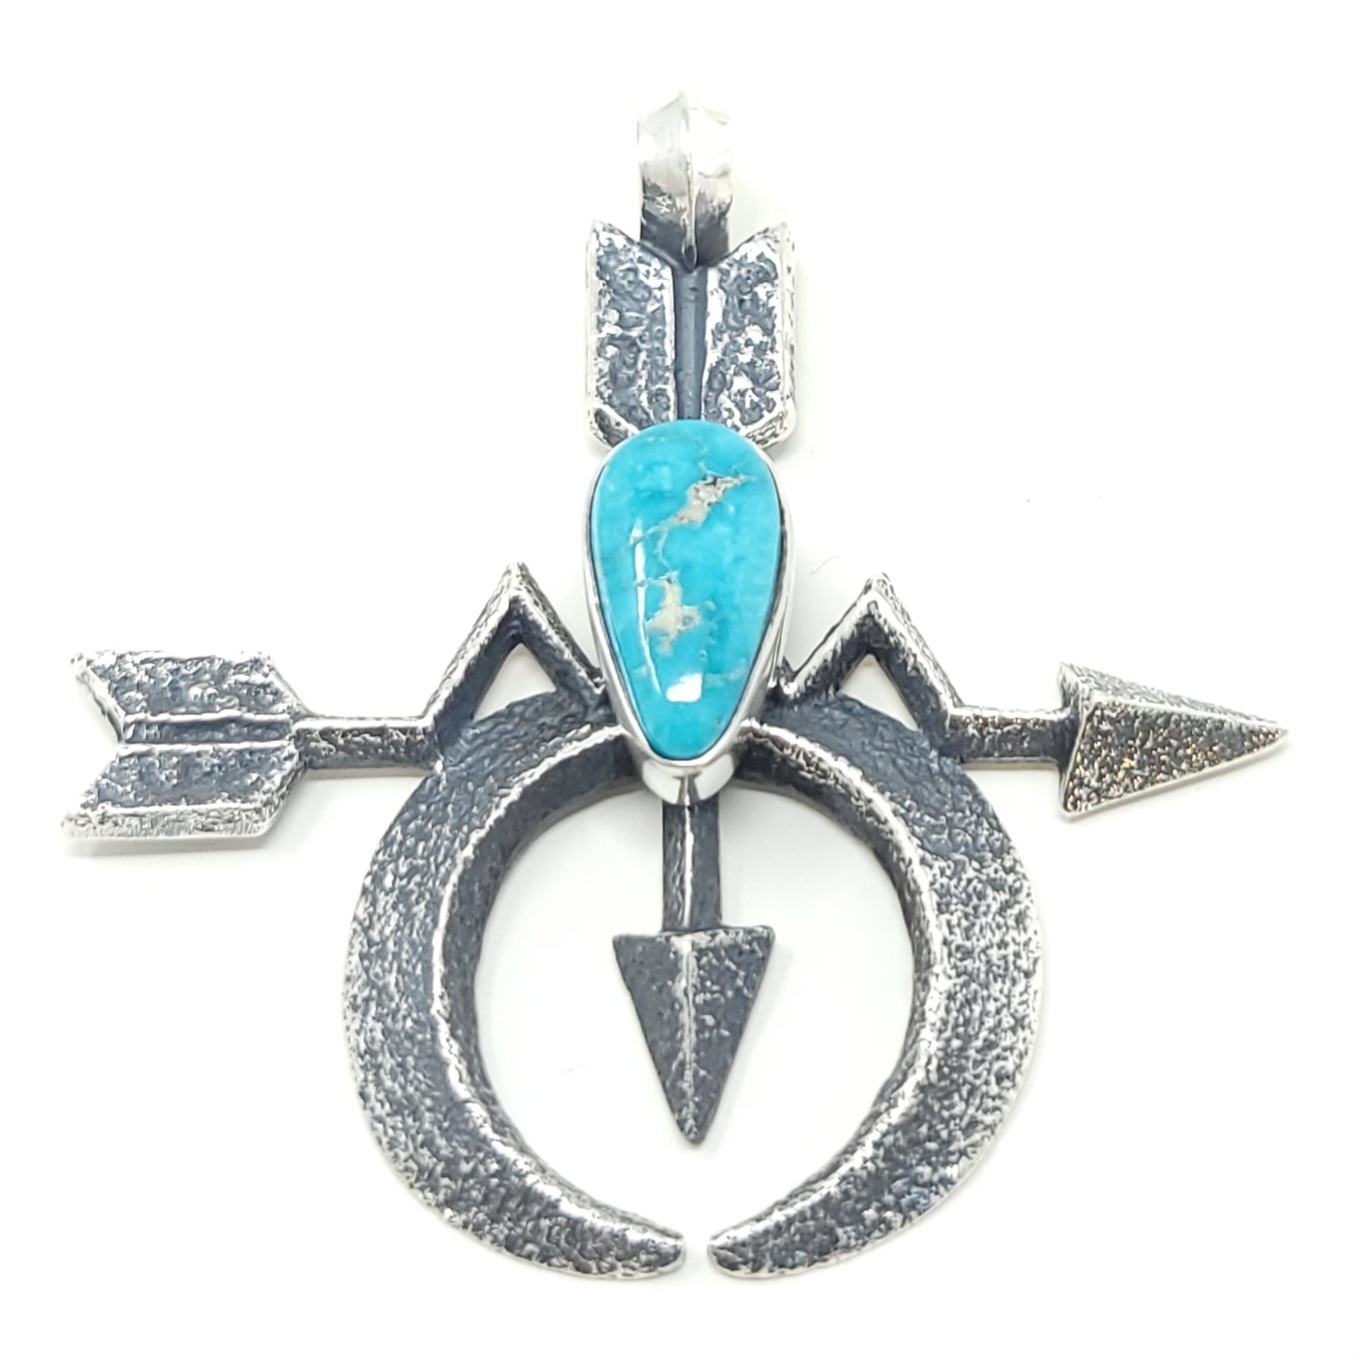 Kevin Yazzie Navajo Sterling Silver Handmade Arrow Pendant White Horse Turquoise